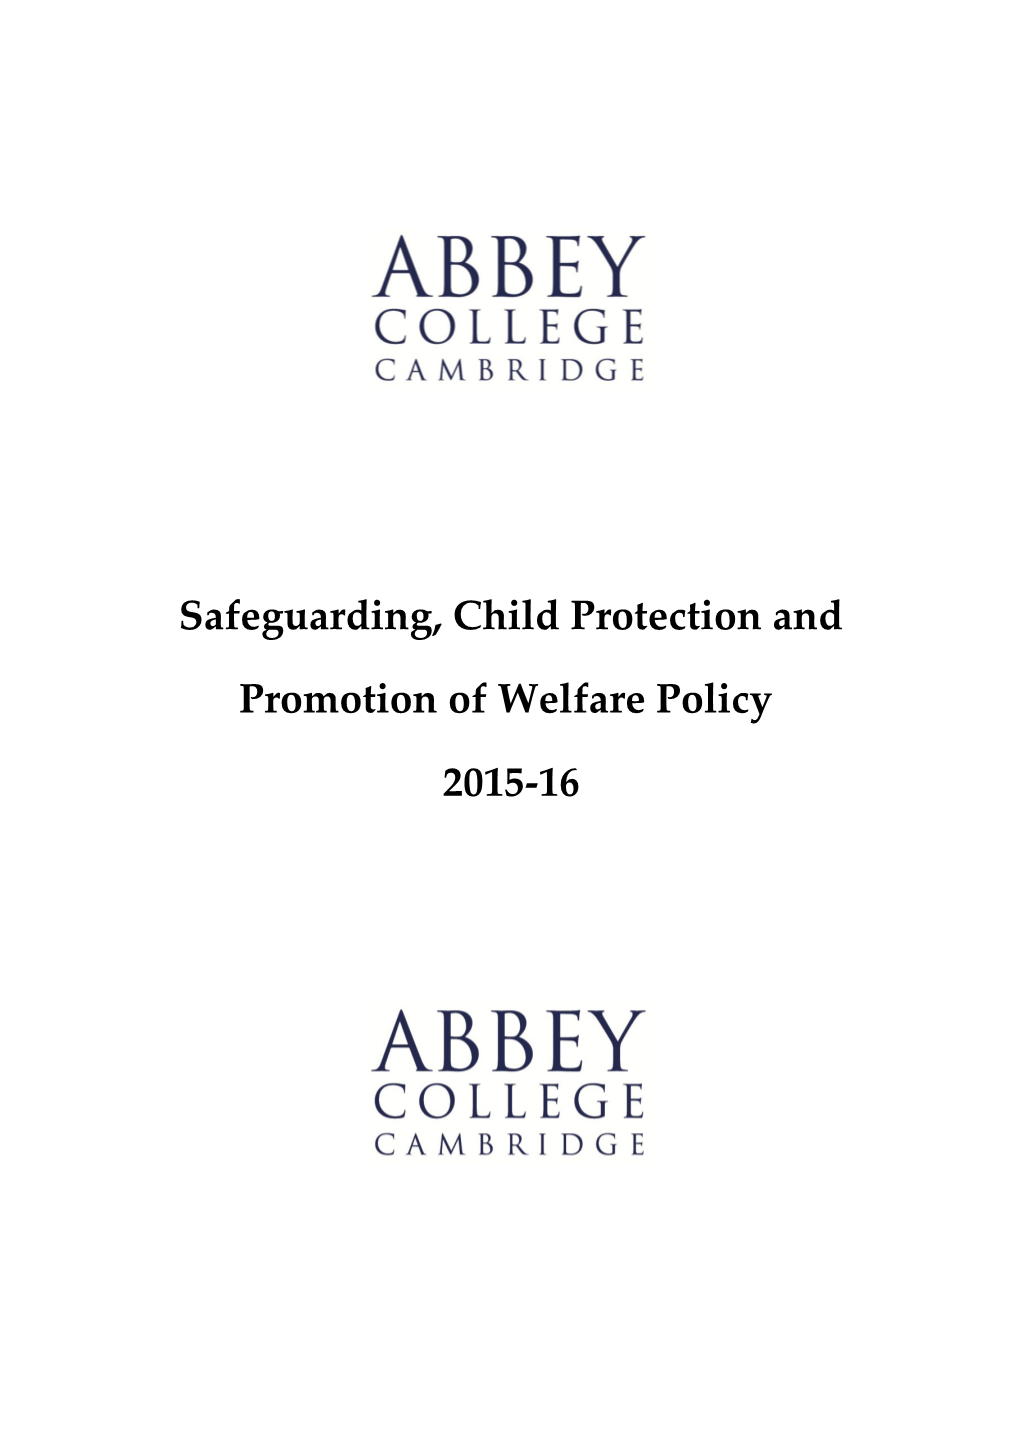 Safeguarding, Child Protection and Promotion of Welfare Policy